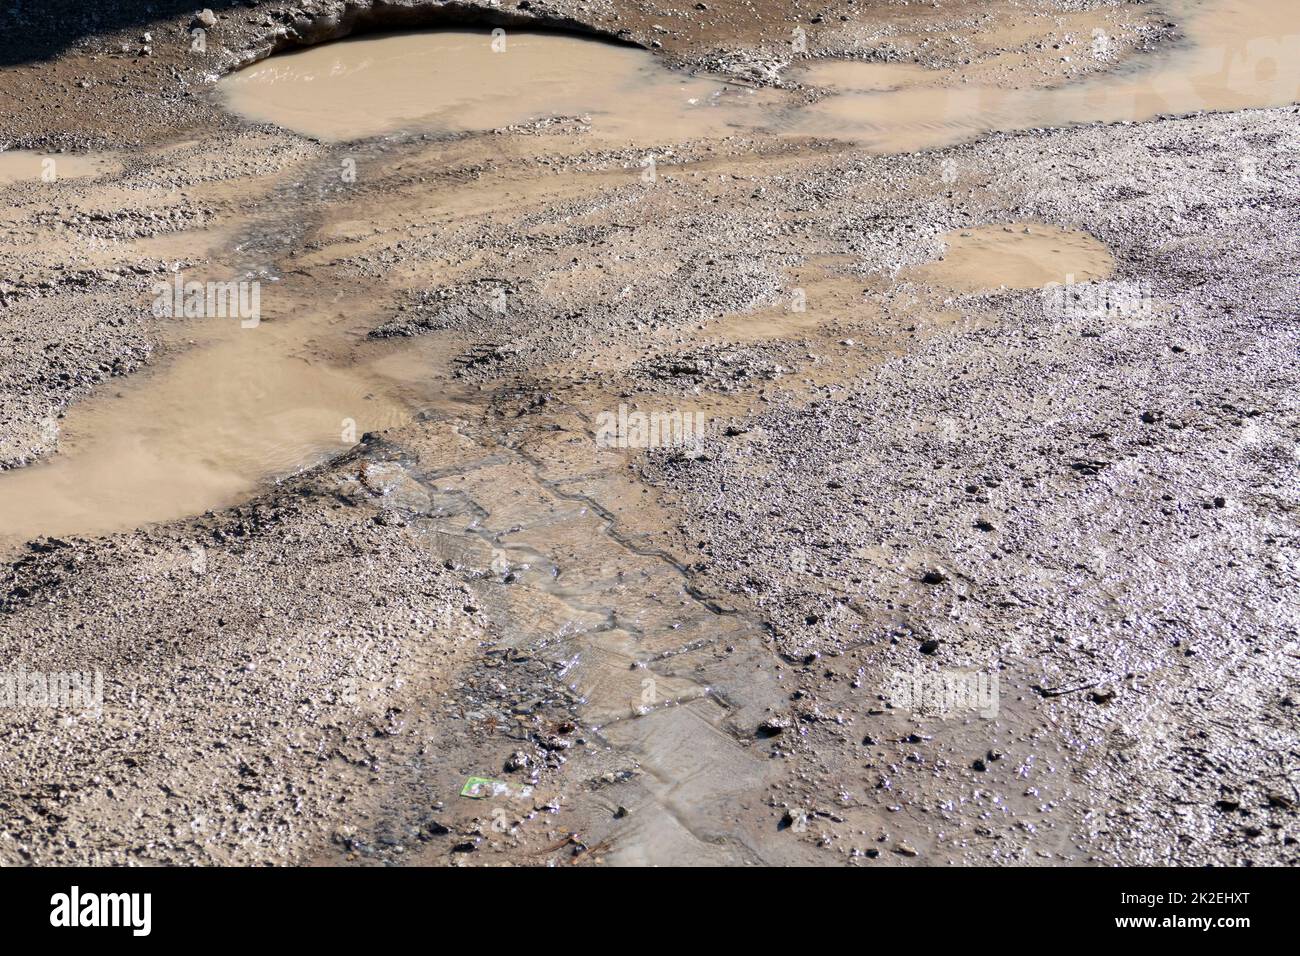 mud and dirty water puddle formed as a result of rain Stock Photo